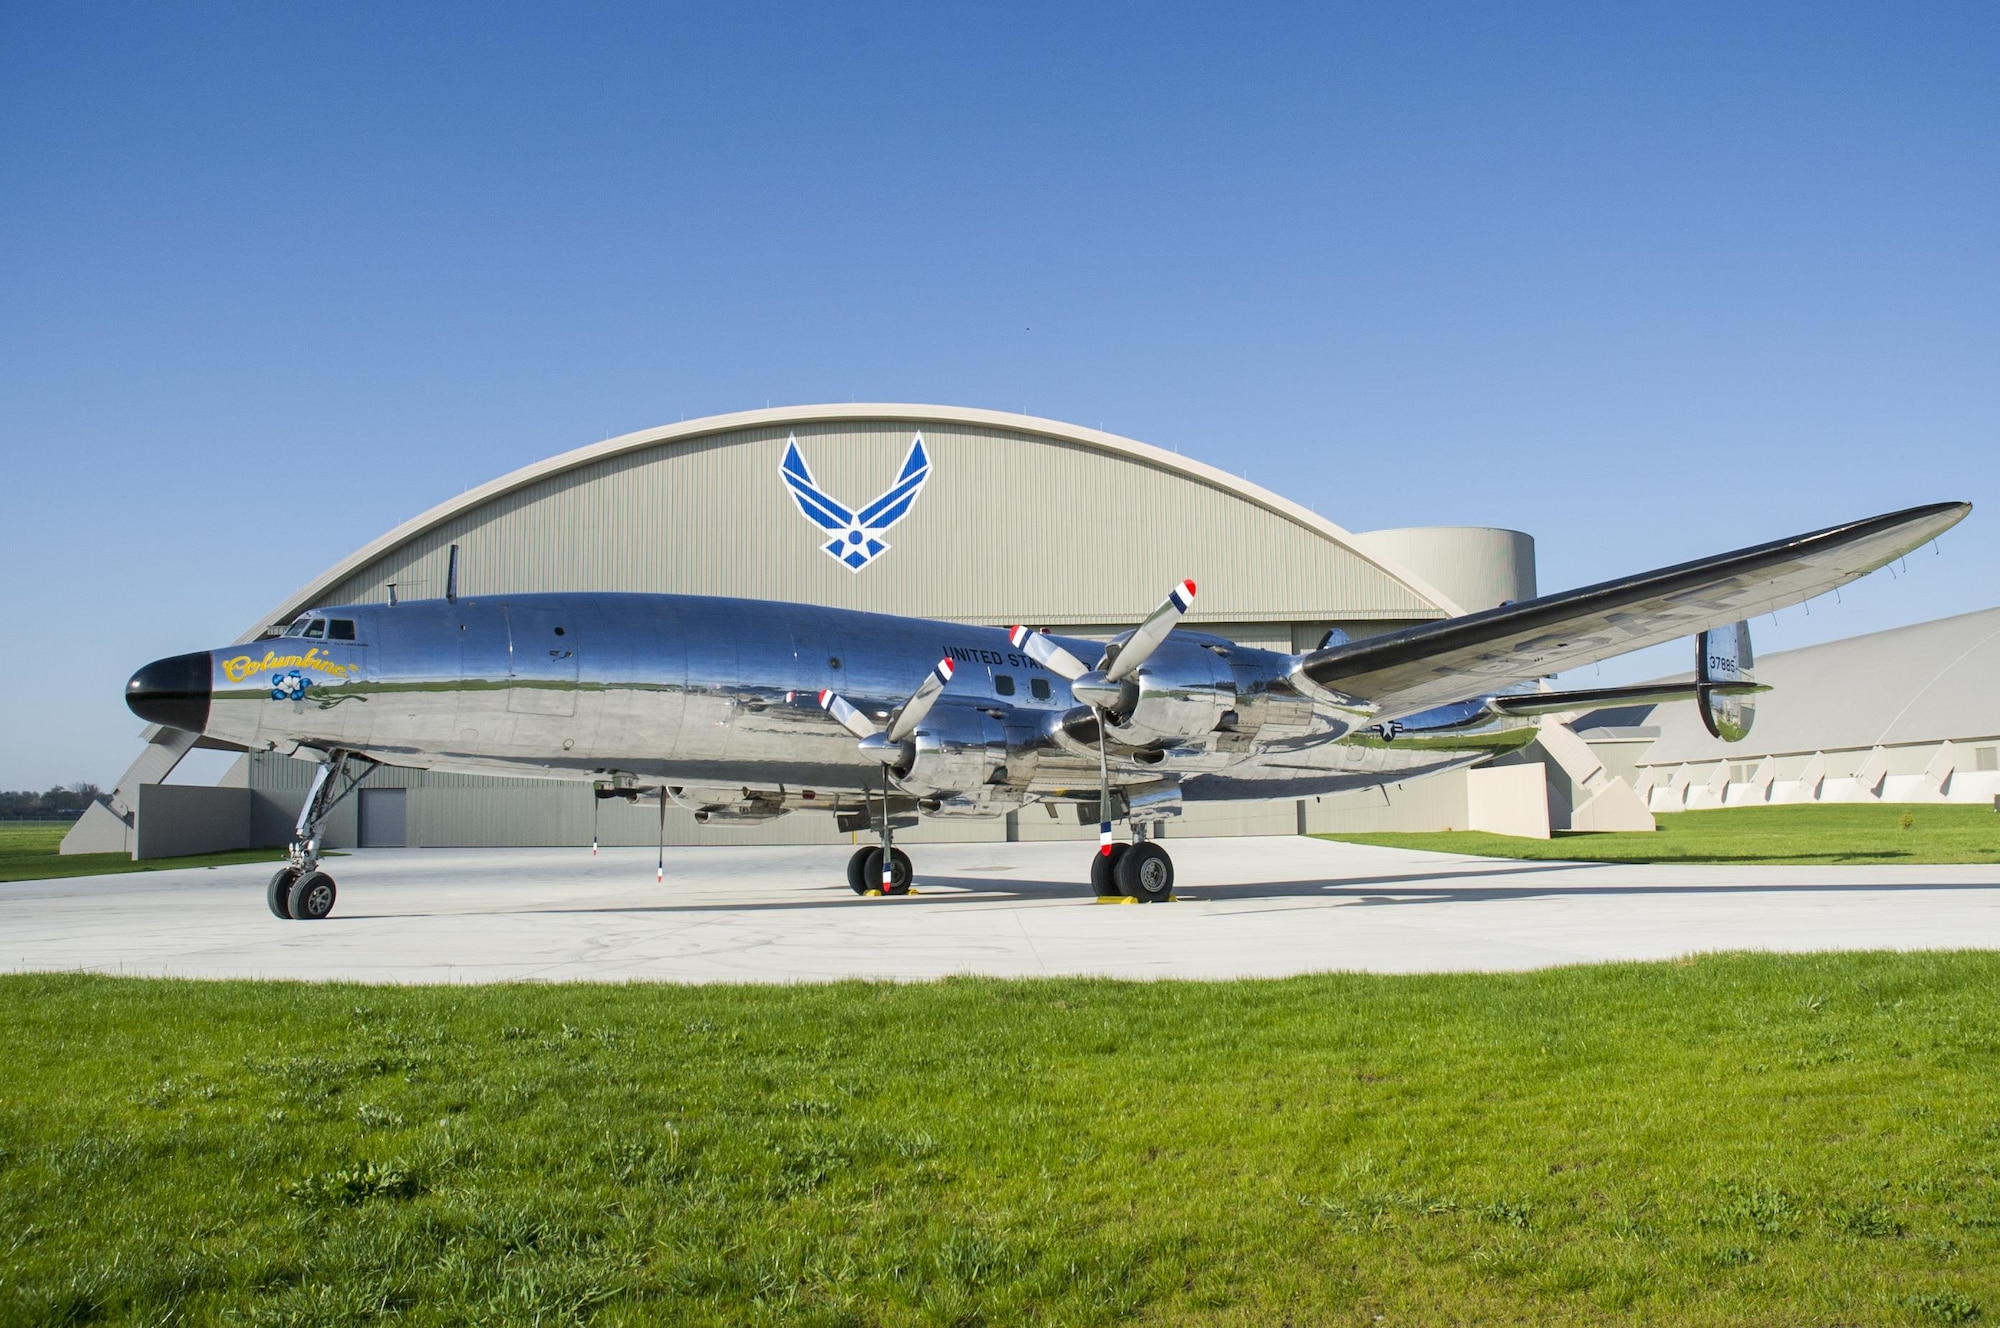 DAYTON, Ohio -- The Lockheed VC-121E “Columbine III” at the National Museum of the United States Air Force on April 23, 2016. This aircraft is one of ten Presidential aircraft in the collection. (U.S. Air Force photo by Ken LaRock)
